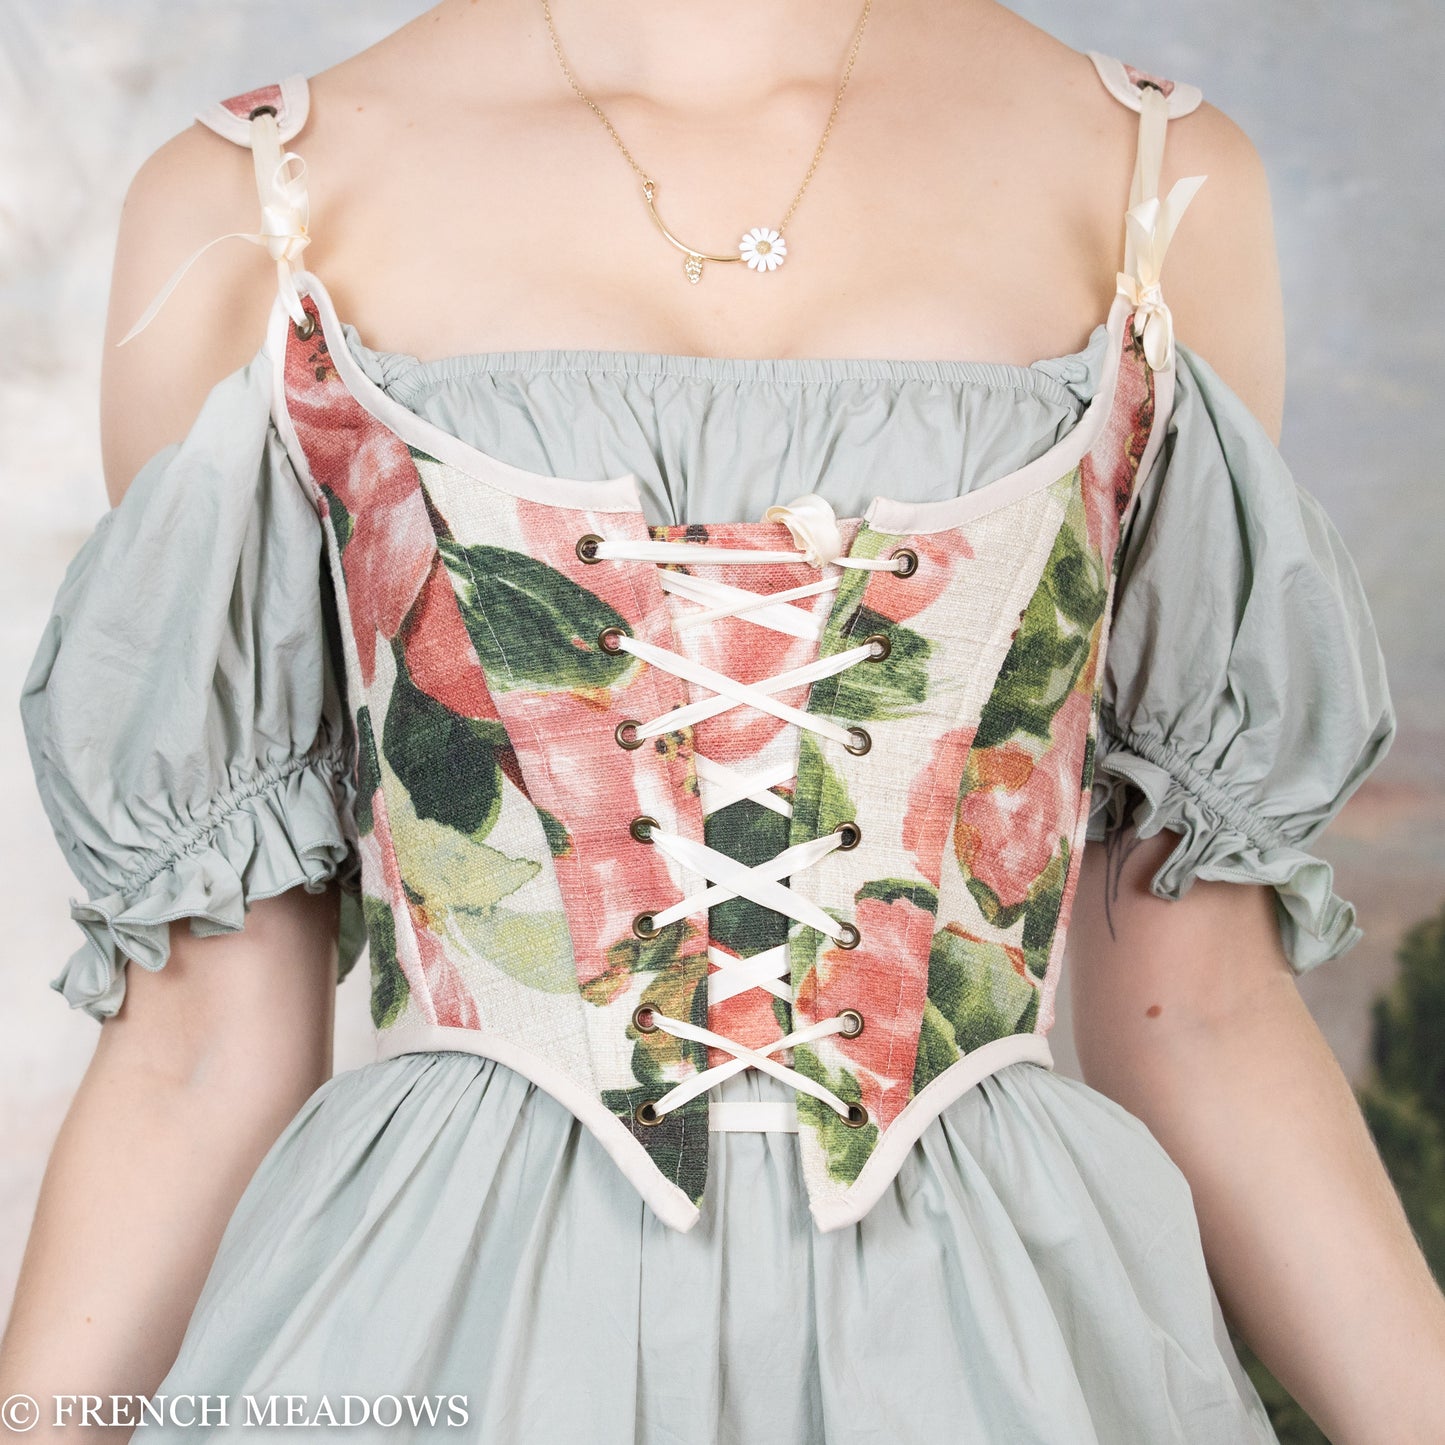 close up details of pink floral renaissance corset top shows large peony flower details and green leaves